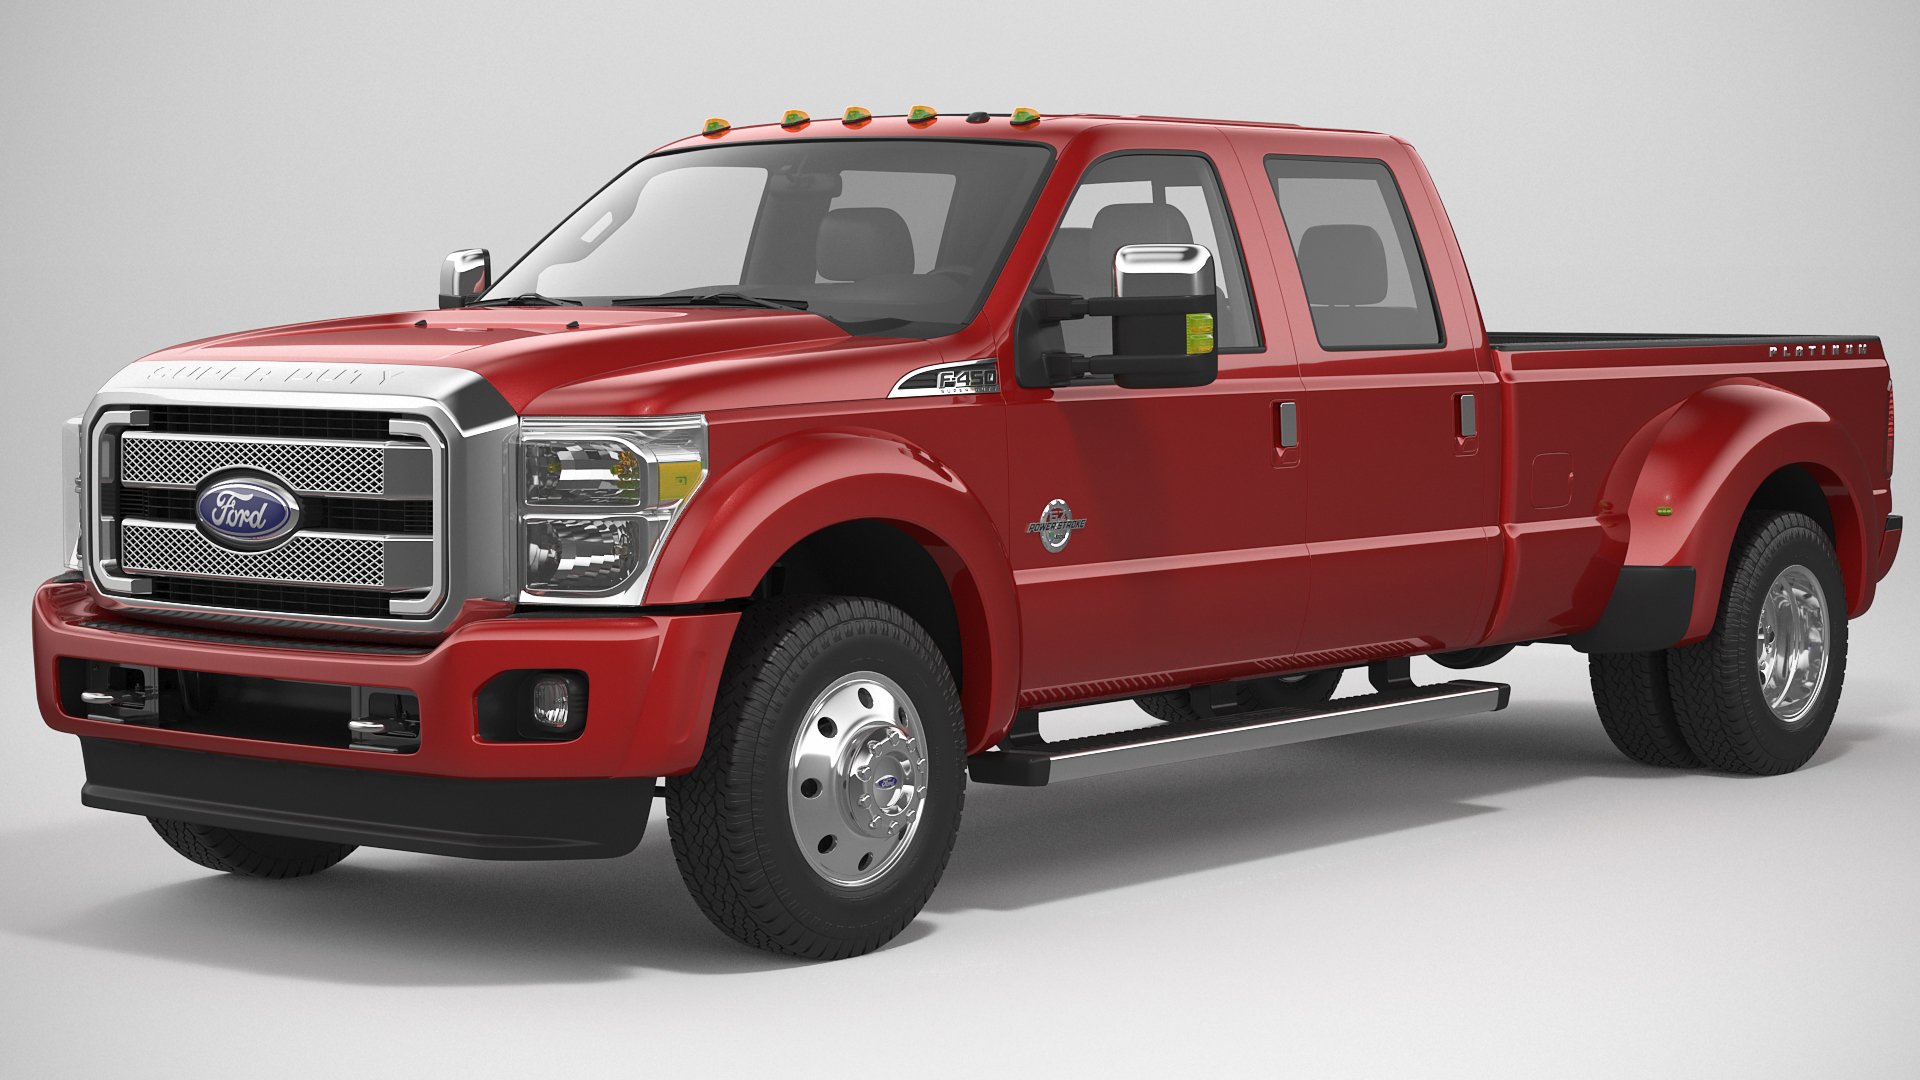 Ford Super Duty 2016 F450 Crew Cab DRW - 3D Model by 3dacuvision